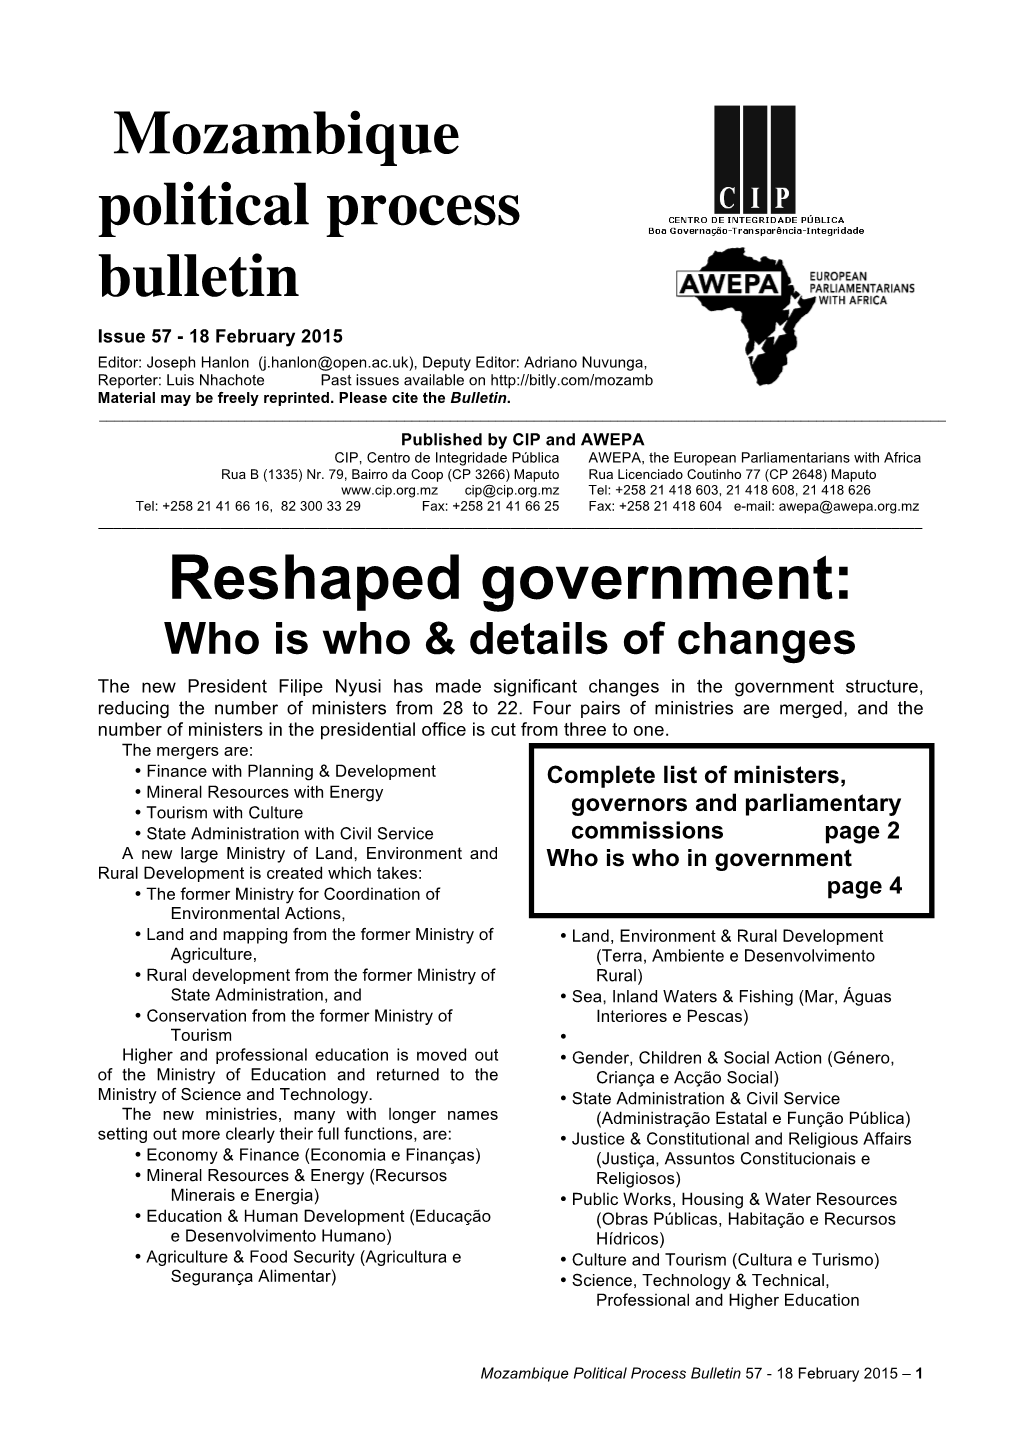 Mozambique Political Process Bulletin Reshaped